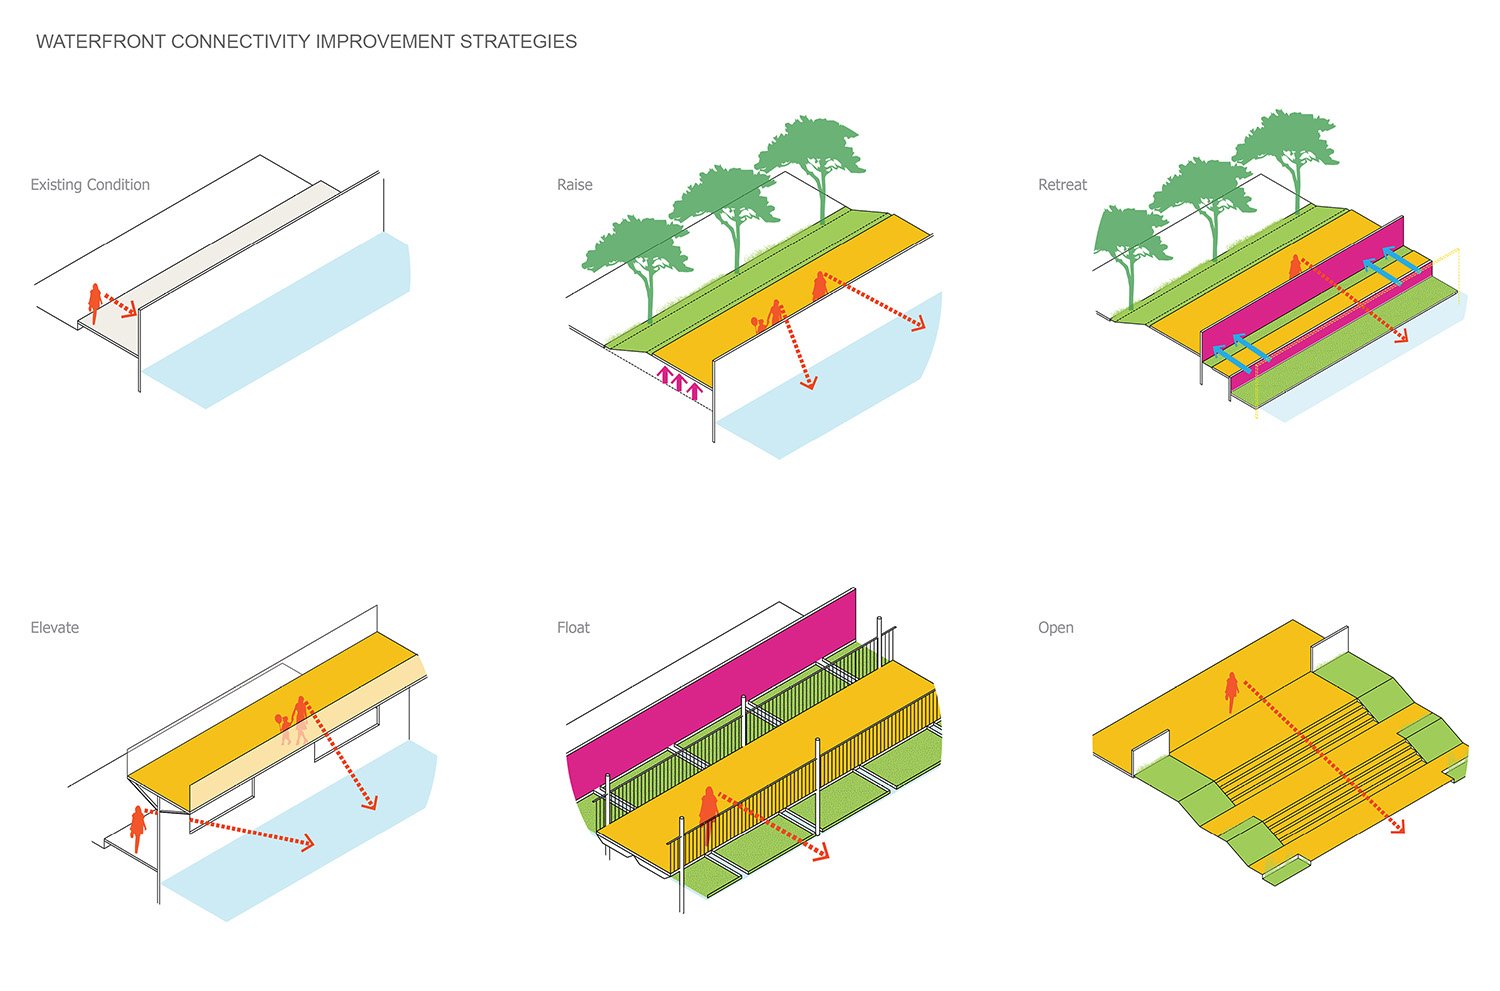 Rethinking Existing Floodwall Infrastructure: A holistic evaluation of accessibility, visual connectivity, and flood control leads to a variety of functional yet elegant solutions to address the creek’s co | 